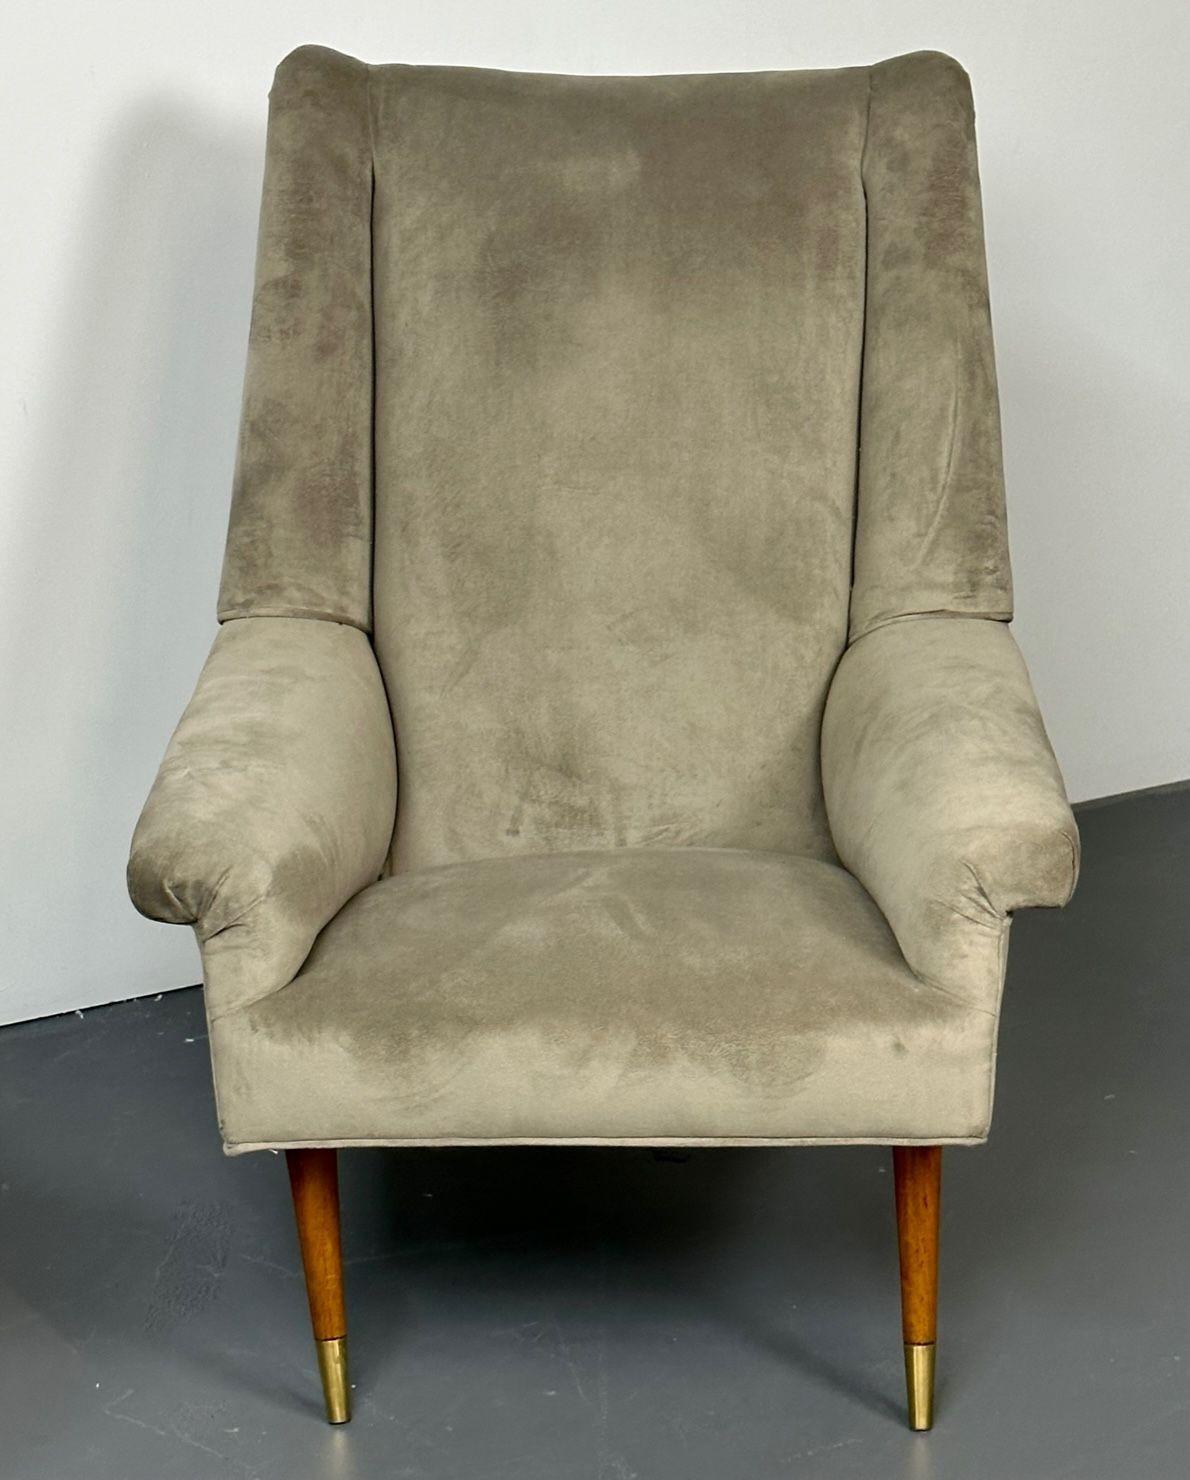 Gio Ponti Style, Mid-Century Modern, Wingback Chairs, Grey Velvet, Wood, 1950s For Sale 5